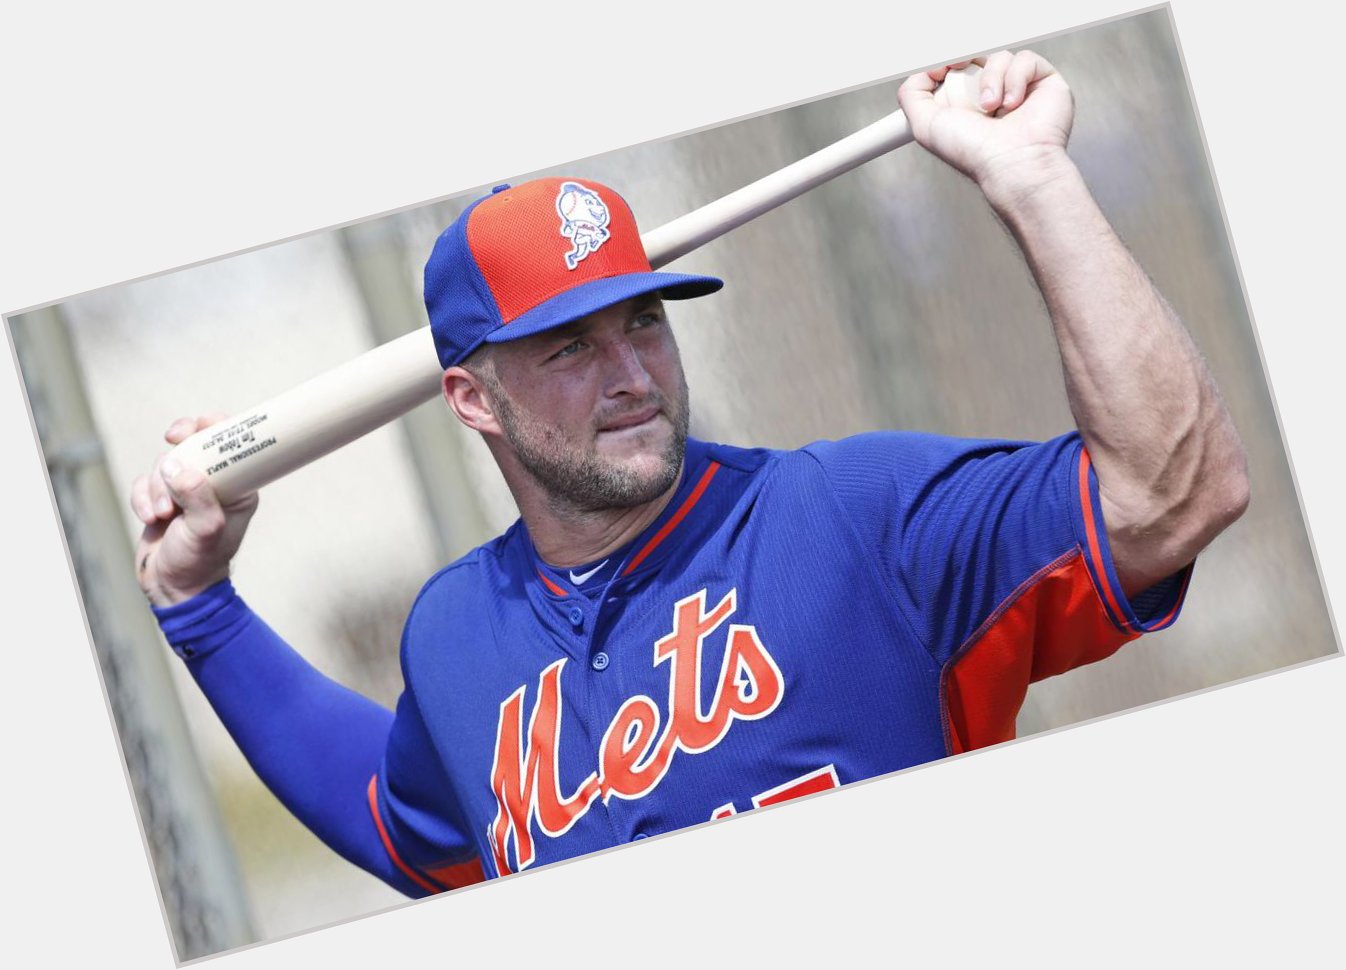 Happy Birthday to Mets outfield prospect Tim Tebow! 